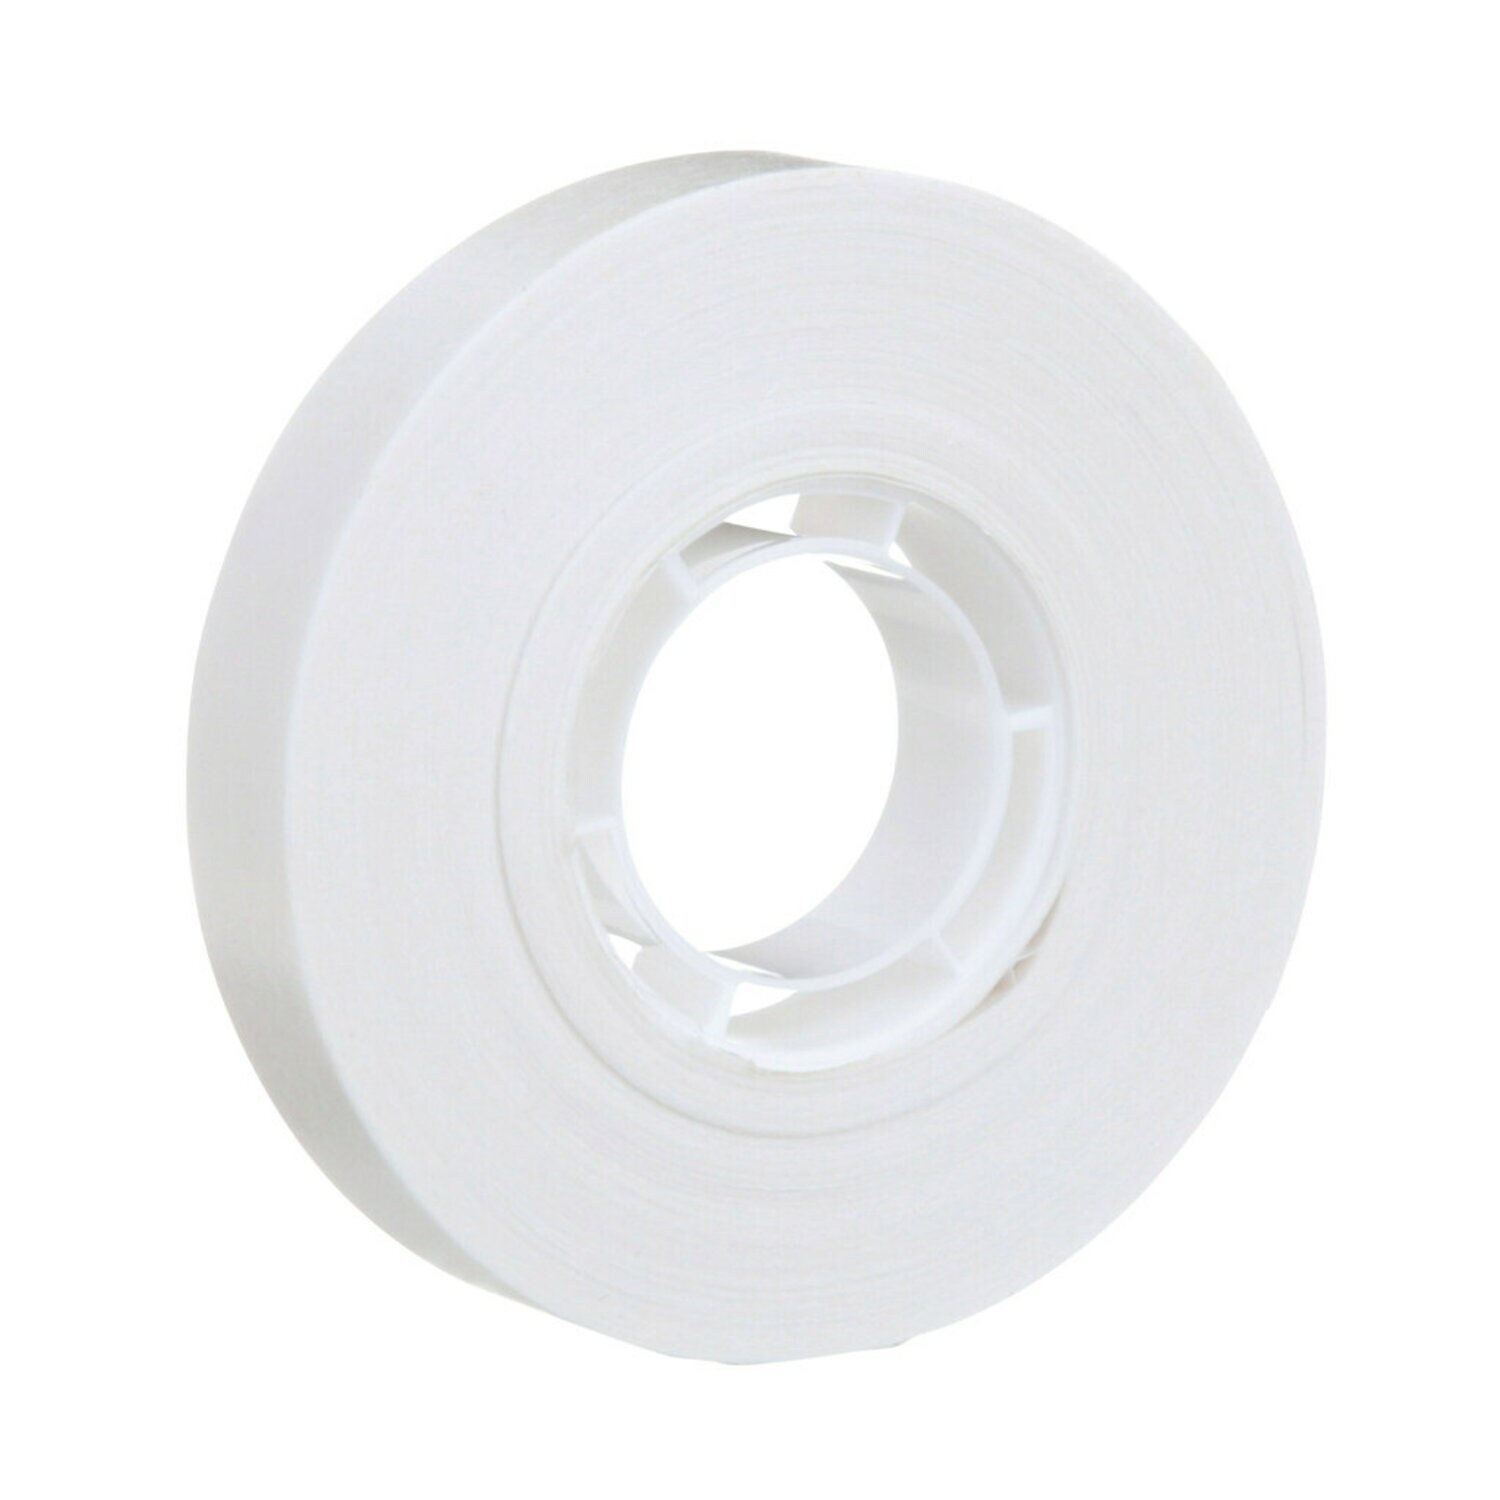 7000048562 - Scotch ATG Repositionable Double Coated Tissue Tape 928, Translucent
White, 1/4 in x 18 yd, 2 mil, 12 rolls/inner, 6 inners/case